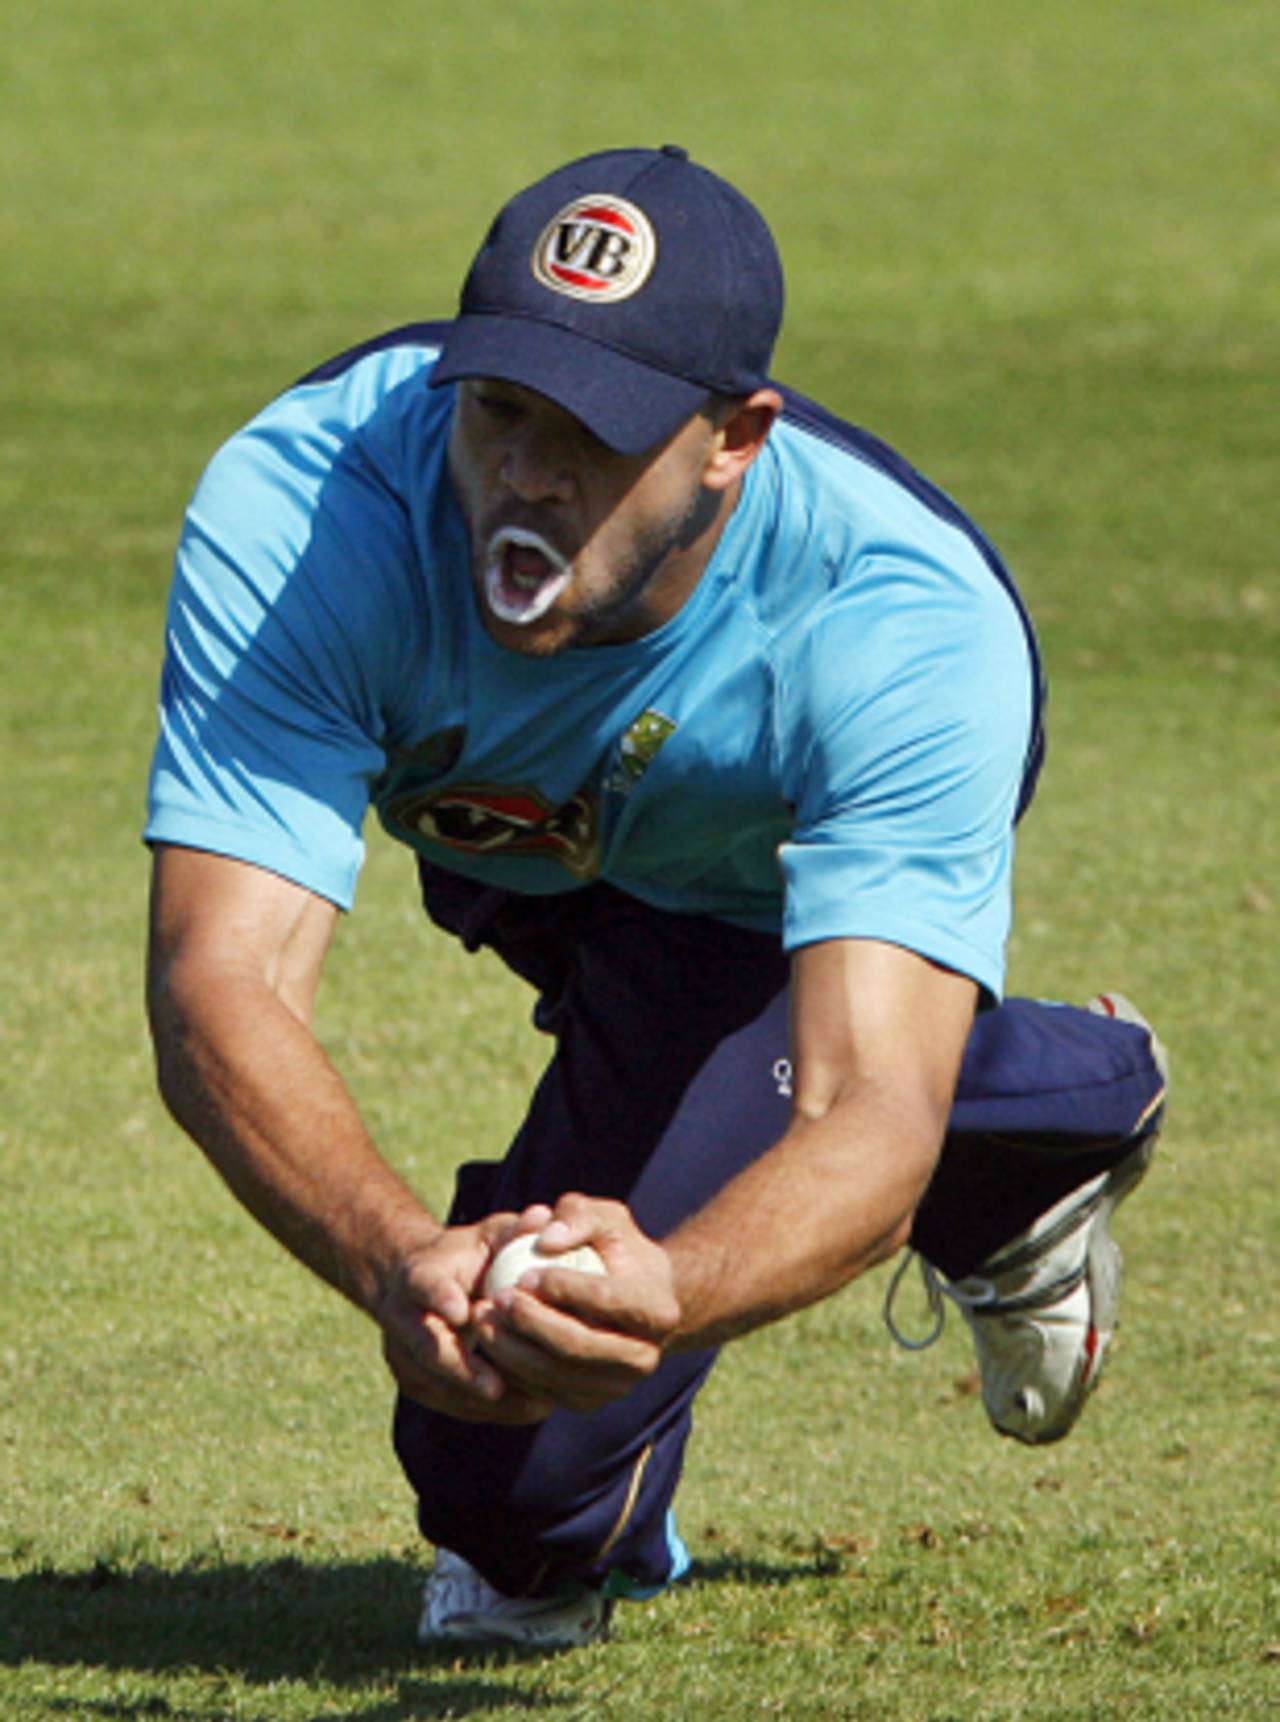 Andrew Symonds holds on to a catch during fielding practice, Nottingham, May 31, 2009